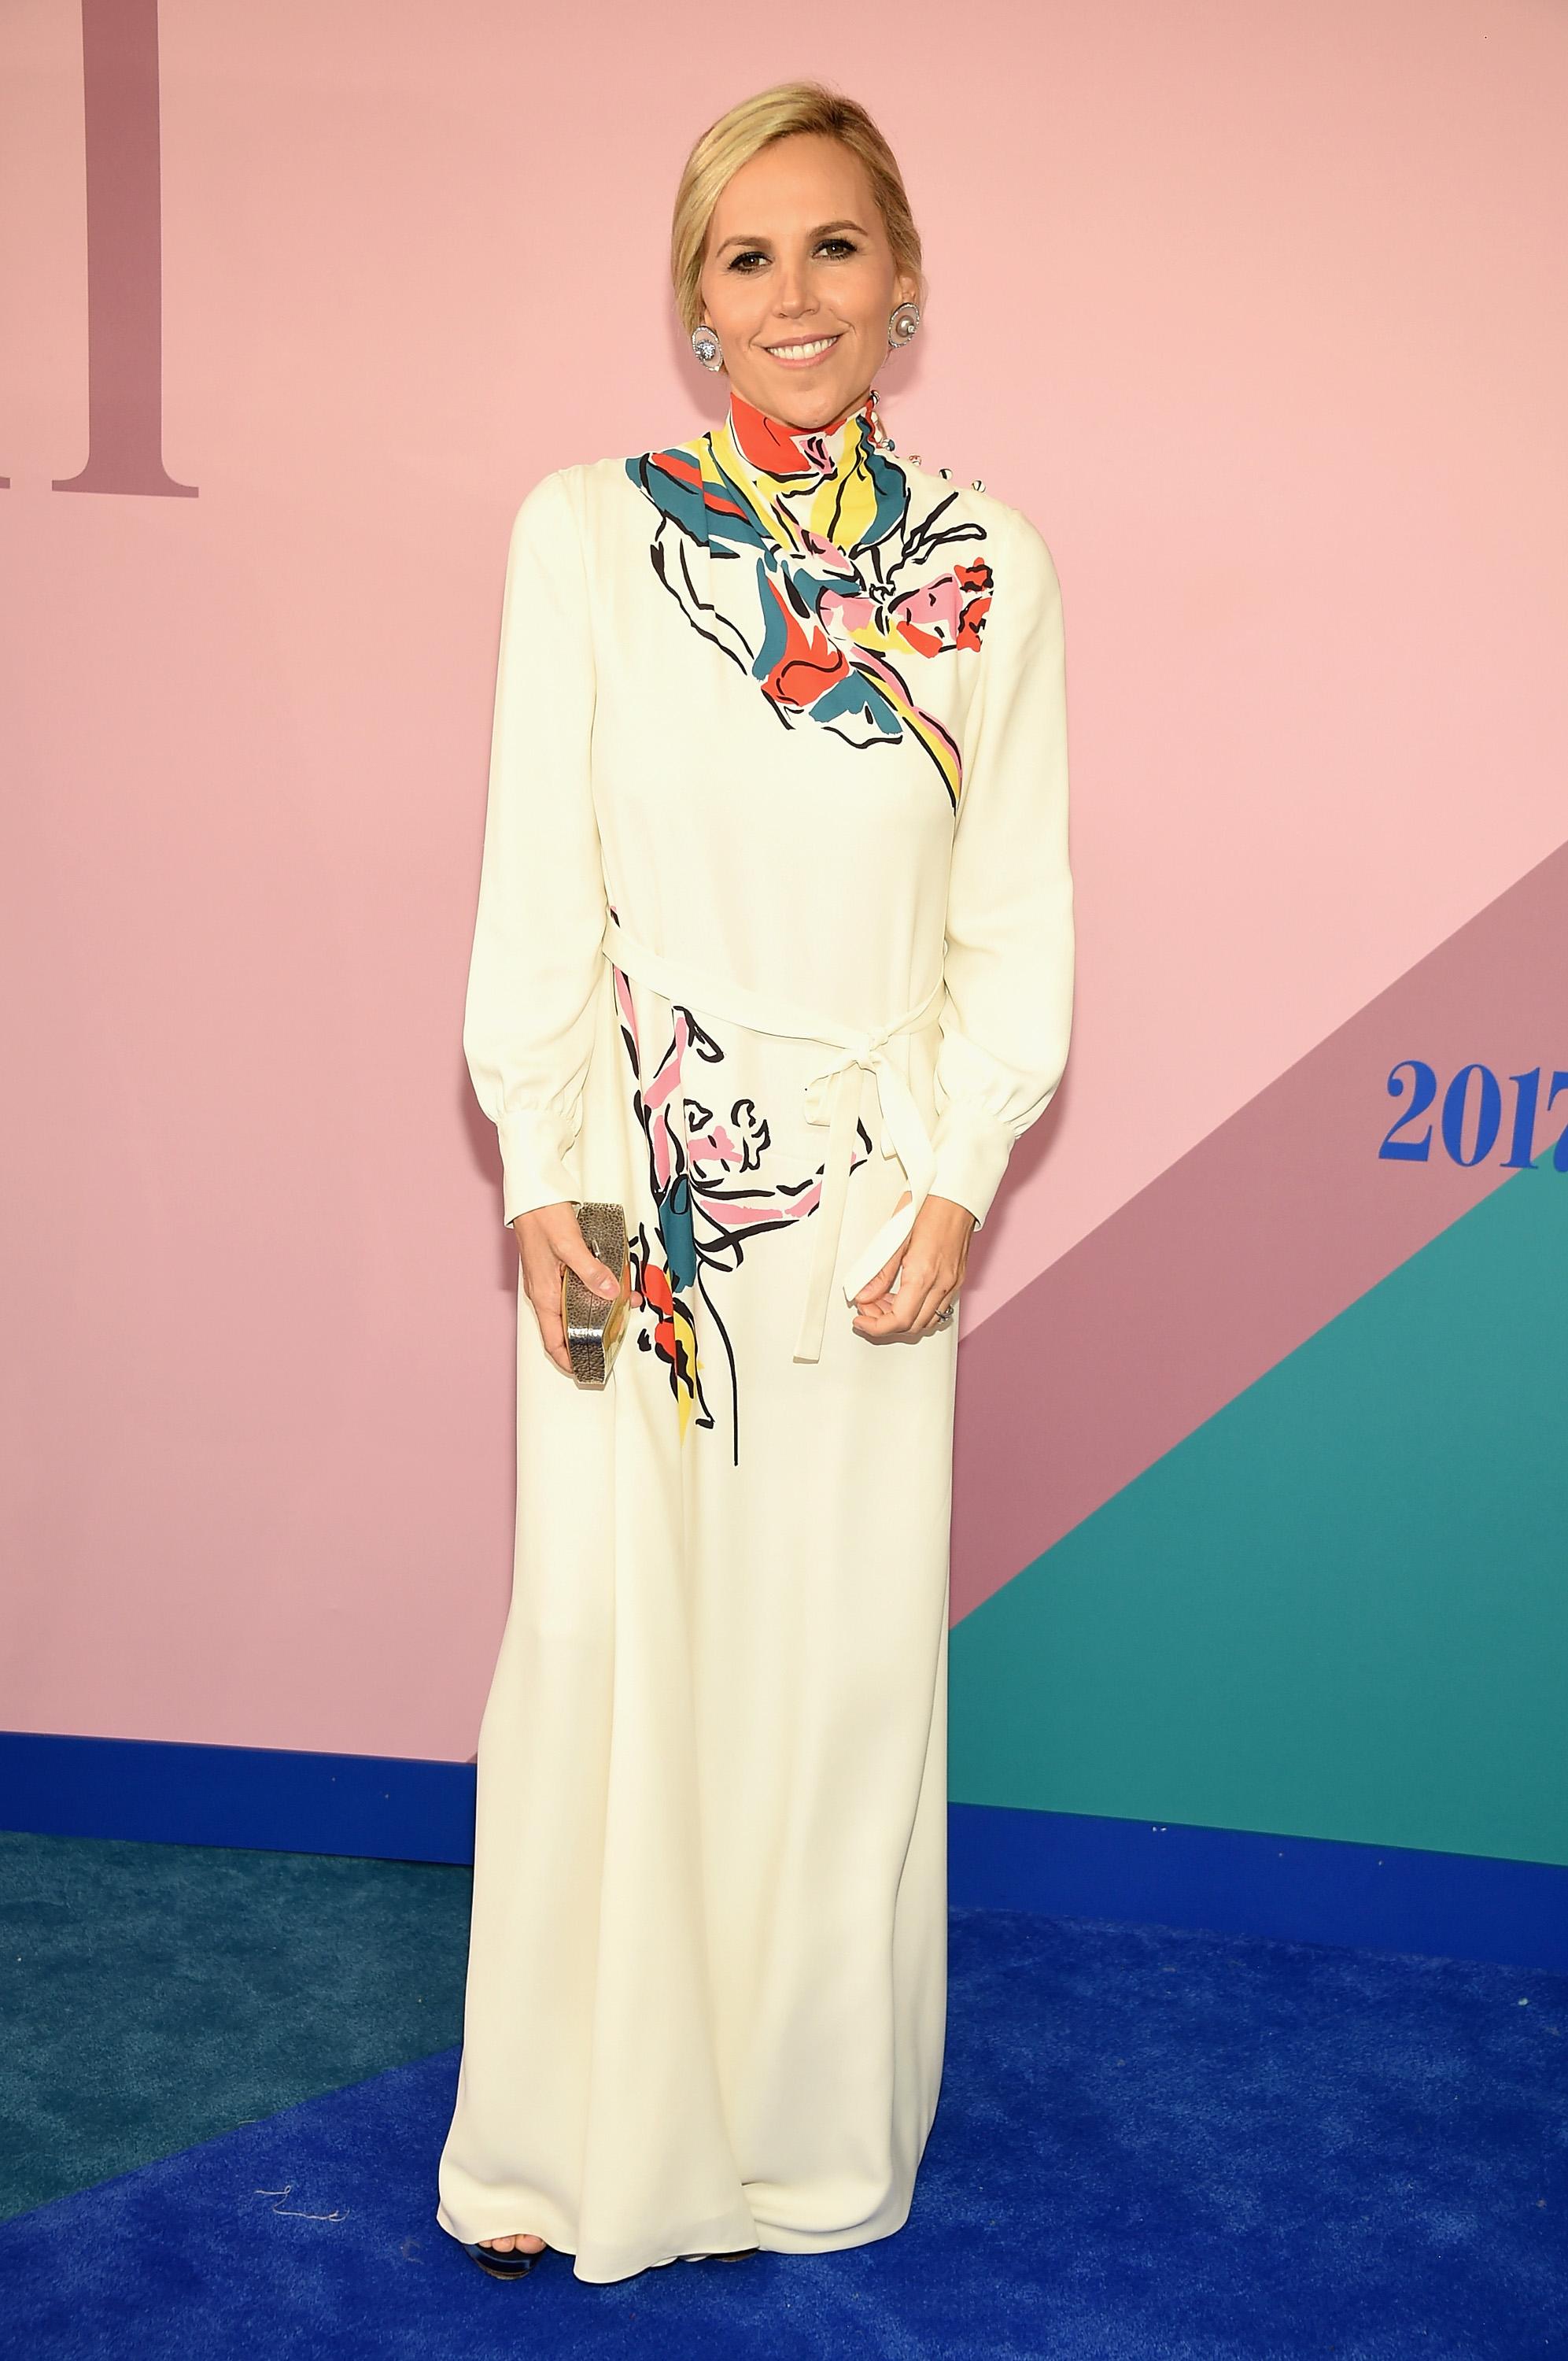 Tory Burch's New Project with Bergdorf Goodman, Condé Nast Shutters  